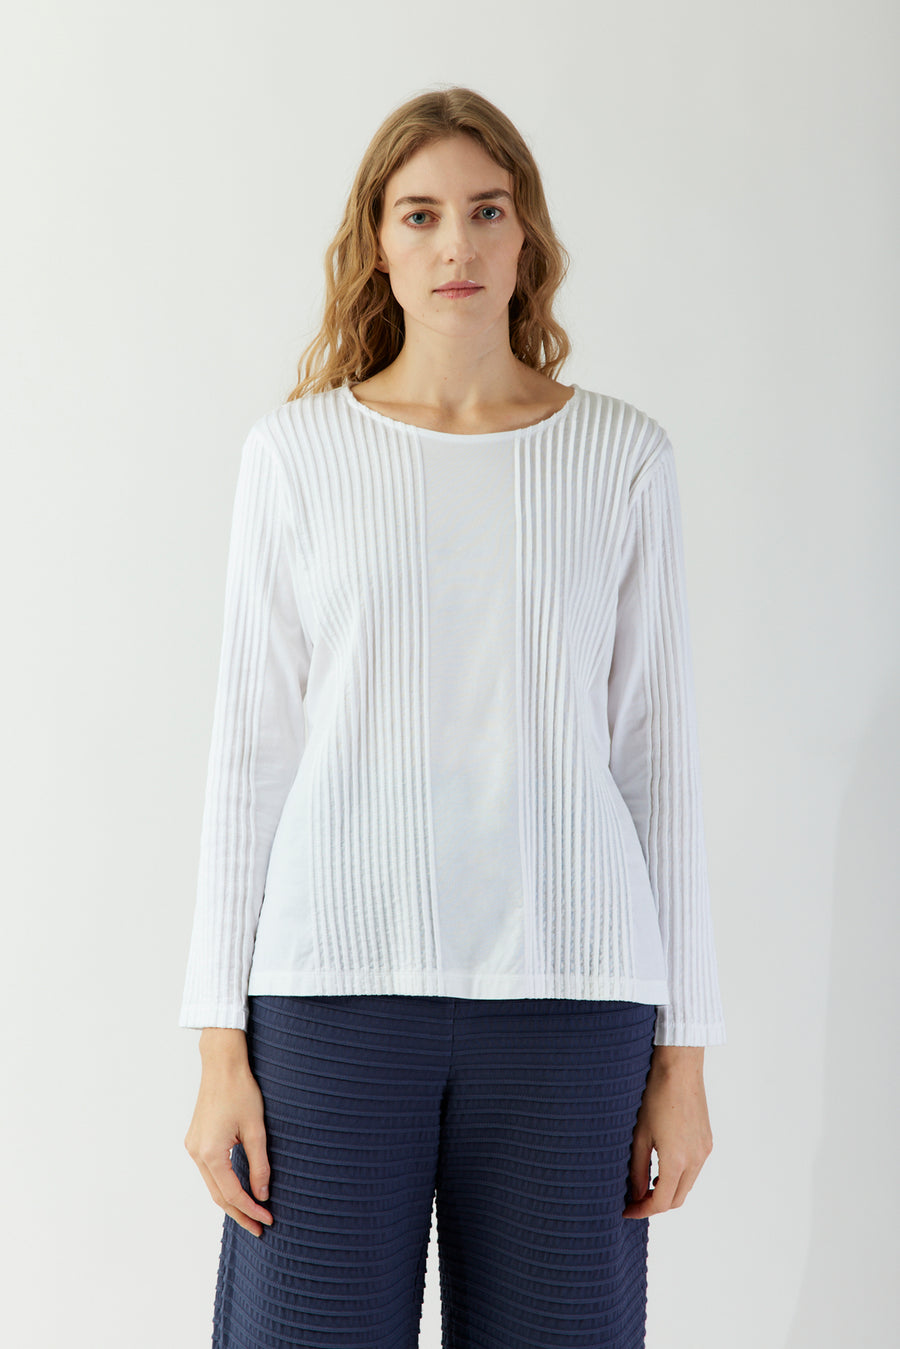 COTTON JERSEY LONG-SLEEVE TOP